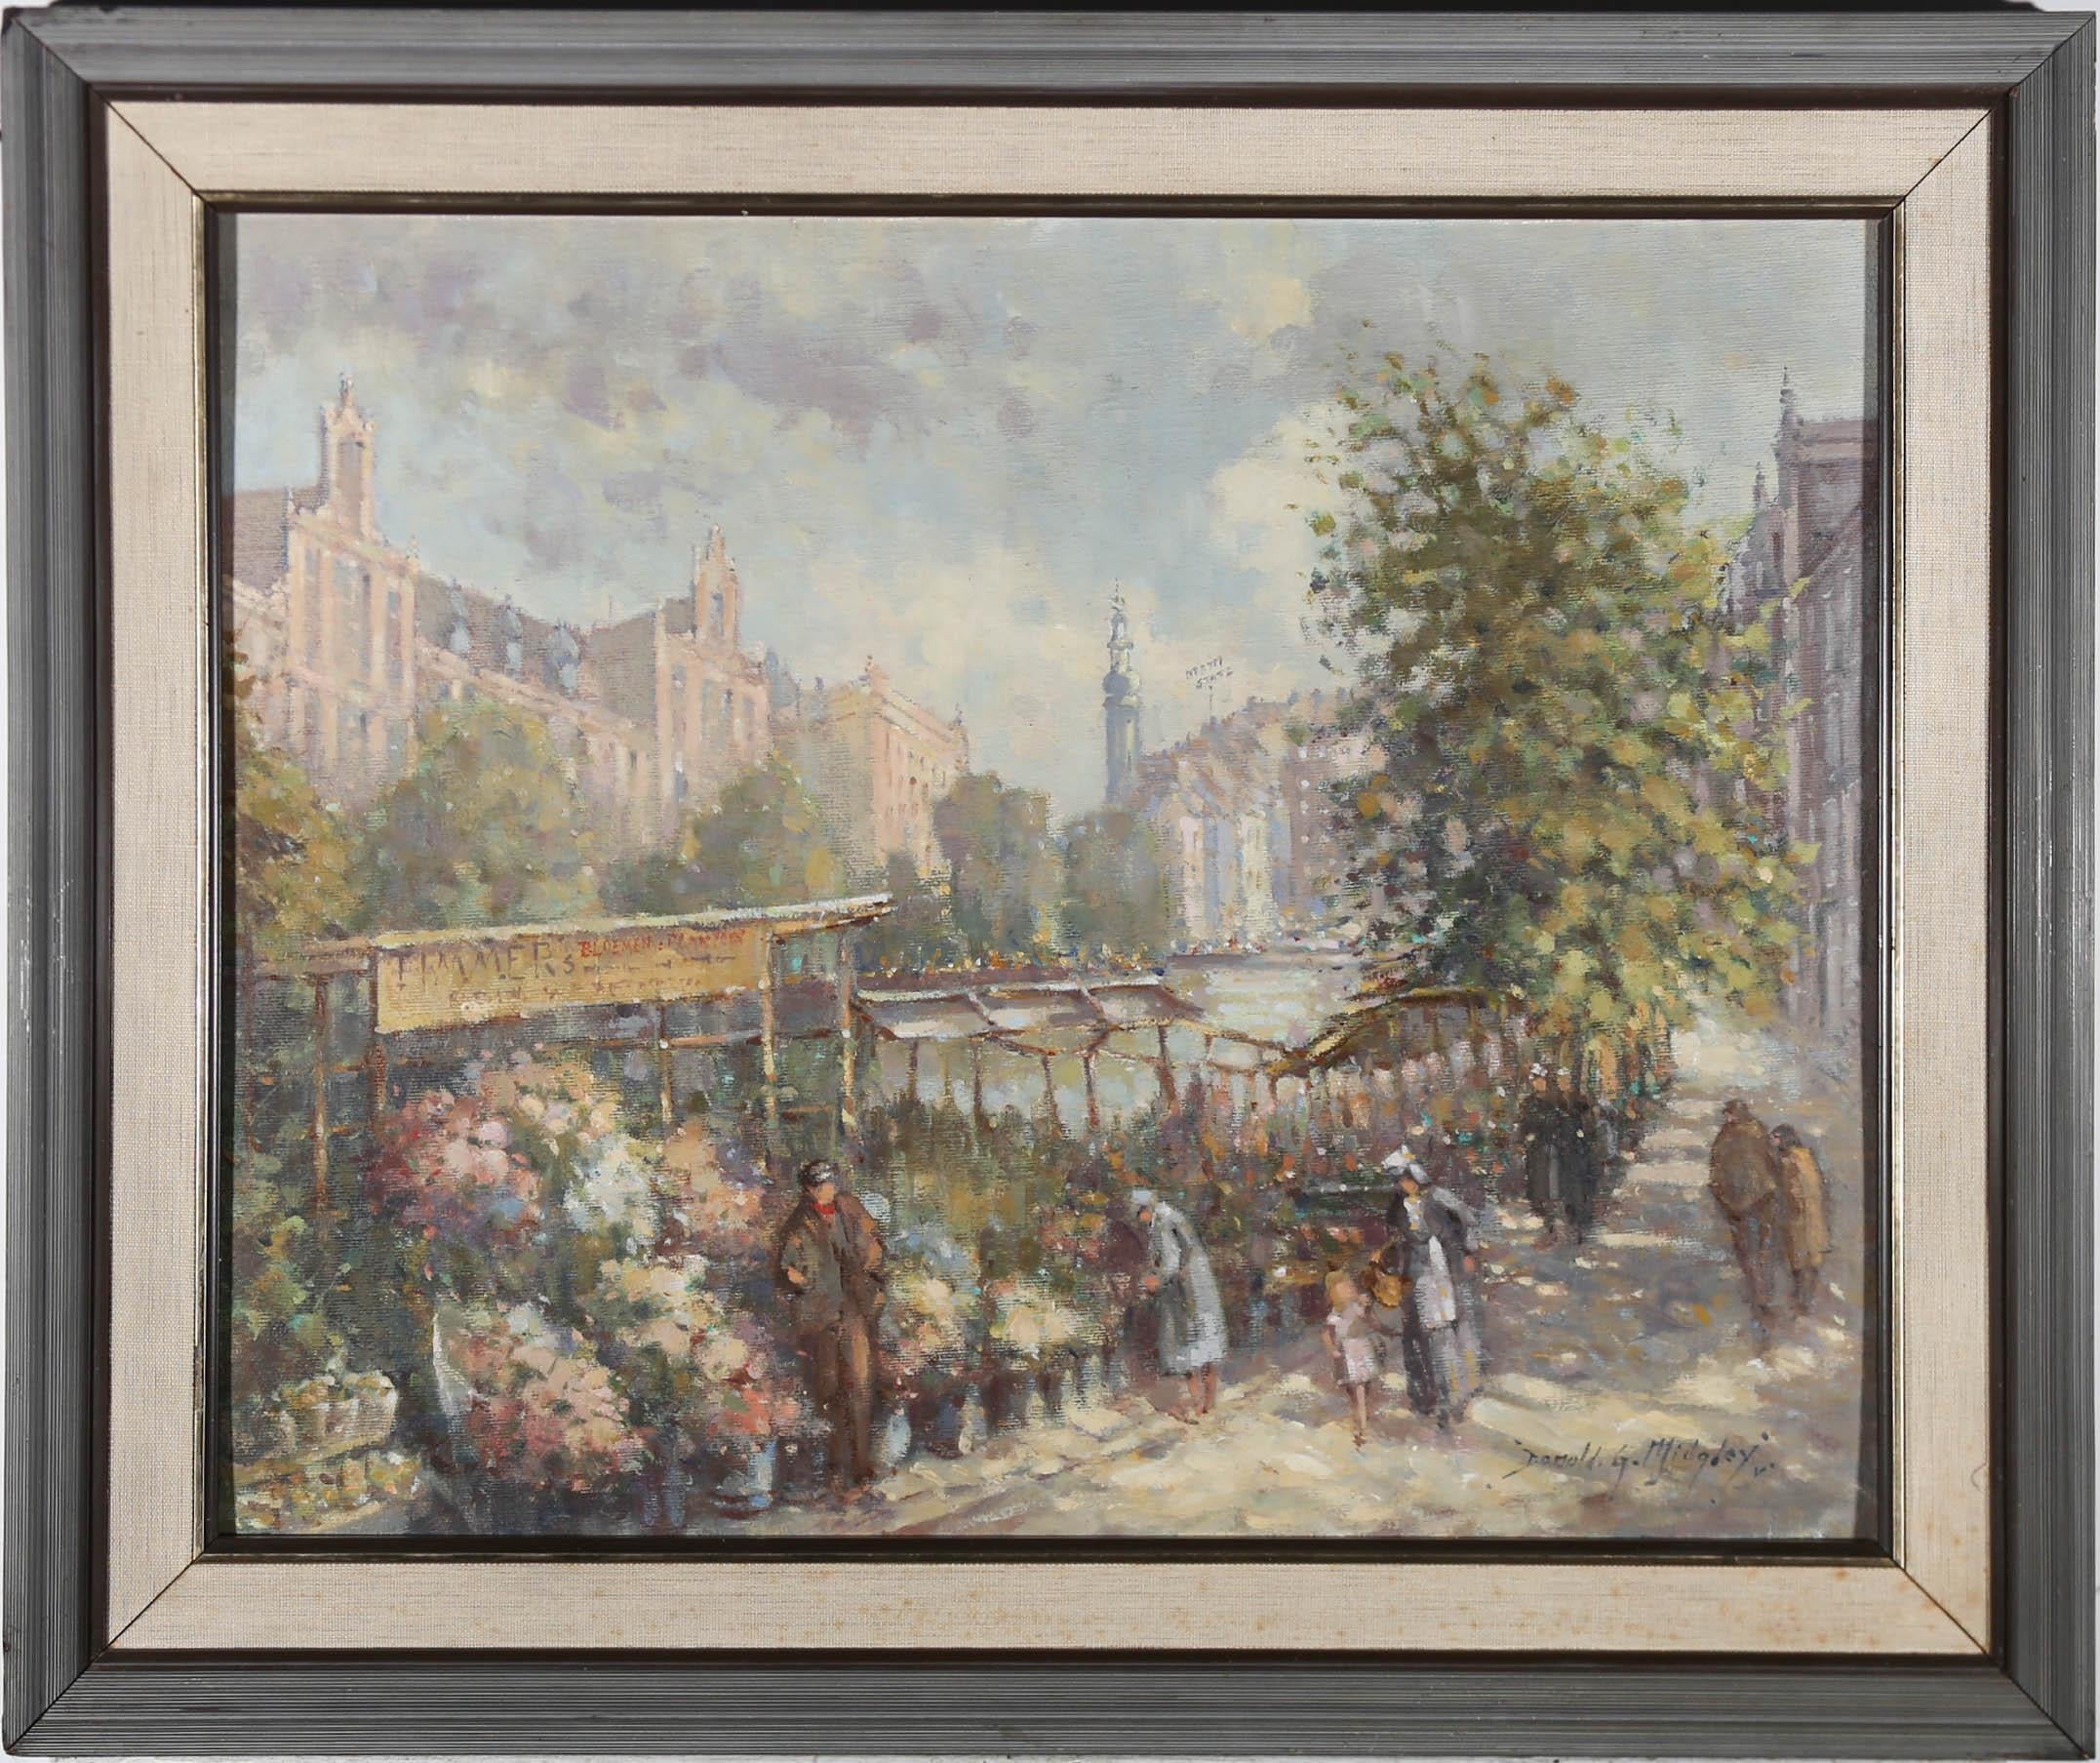 A stunningly painted, impressionistic oil showing a vast flower stall in the heart of Amsterdam. Fresh blooms can be seen running the full length of this canal scene with their overwhelming fragrance only imaginable. The artist has signed to the